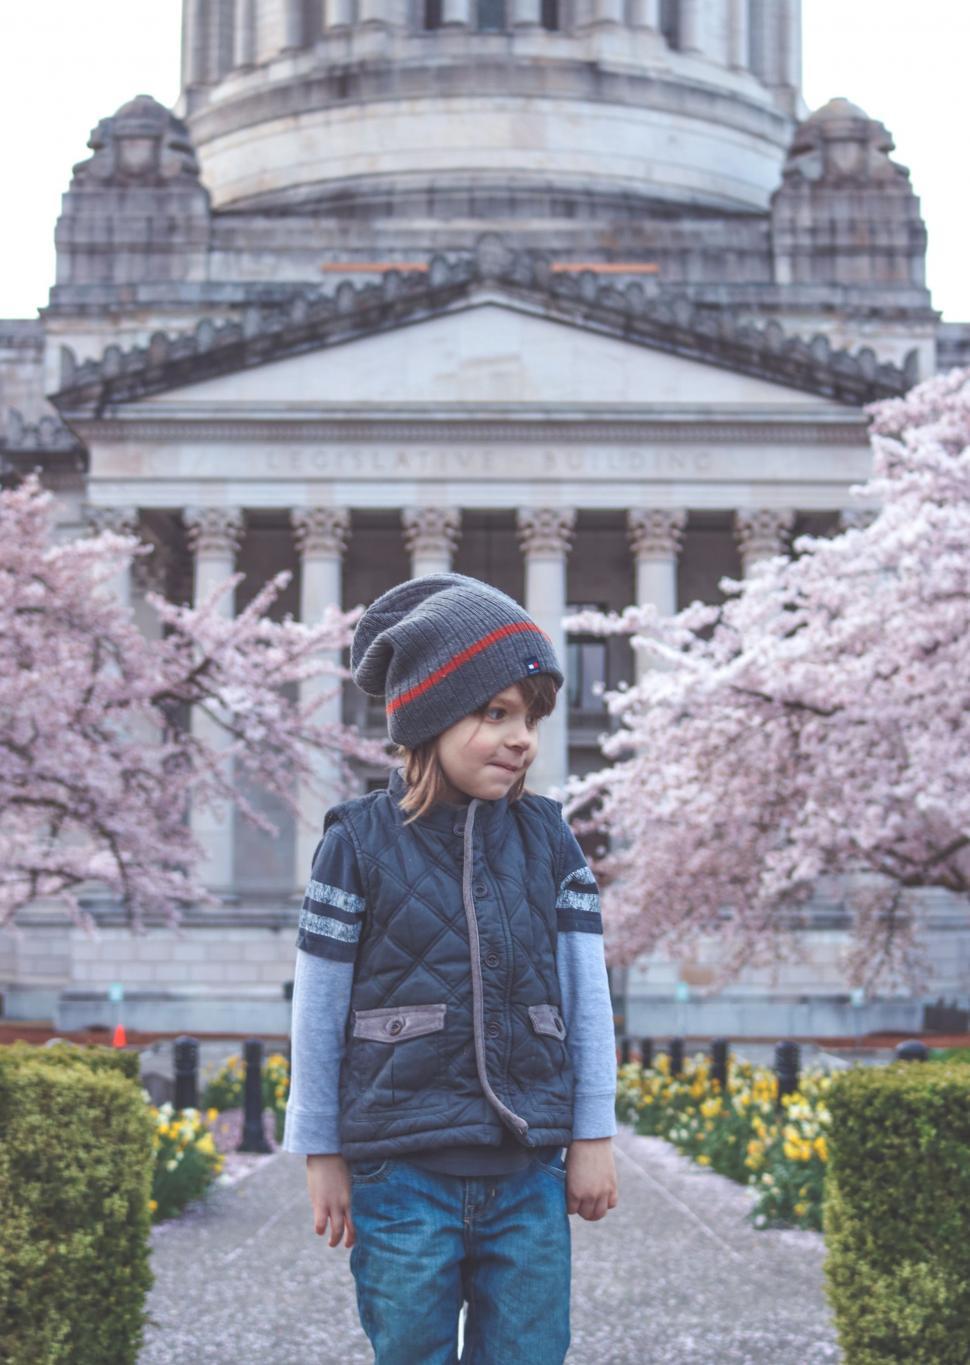 Free Image of Little Boy and Washington State Capitol Building With Cherry Blossom Trees 